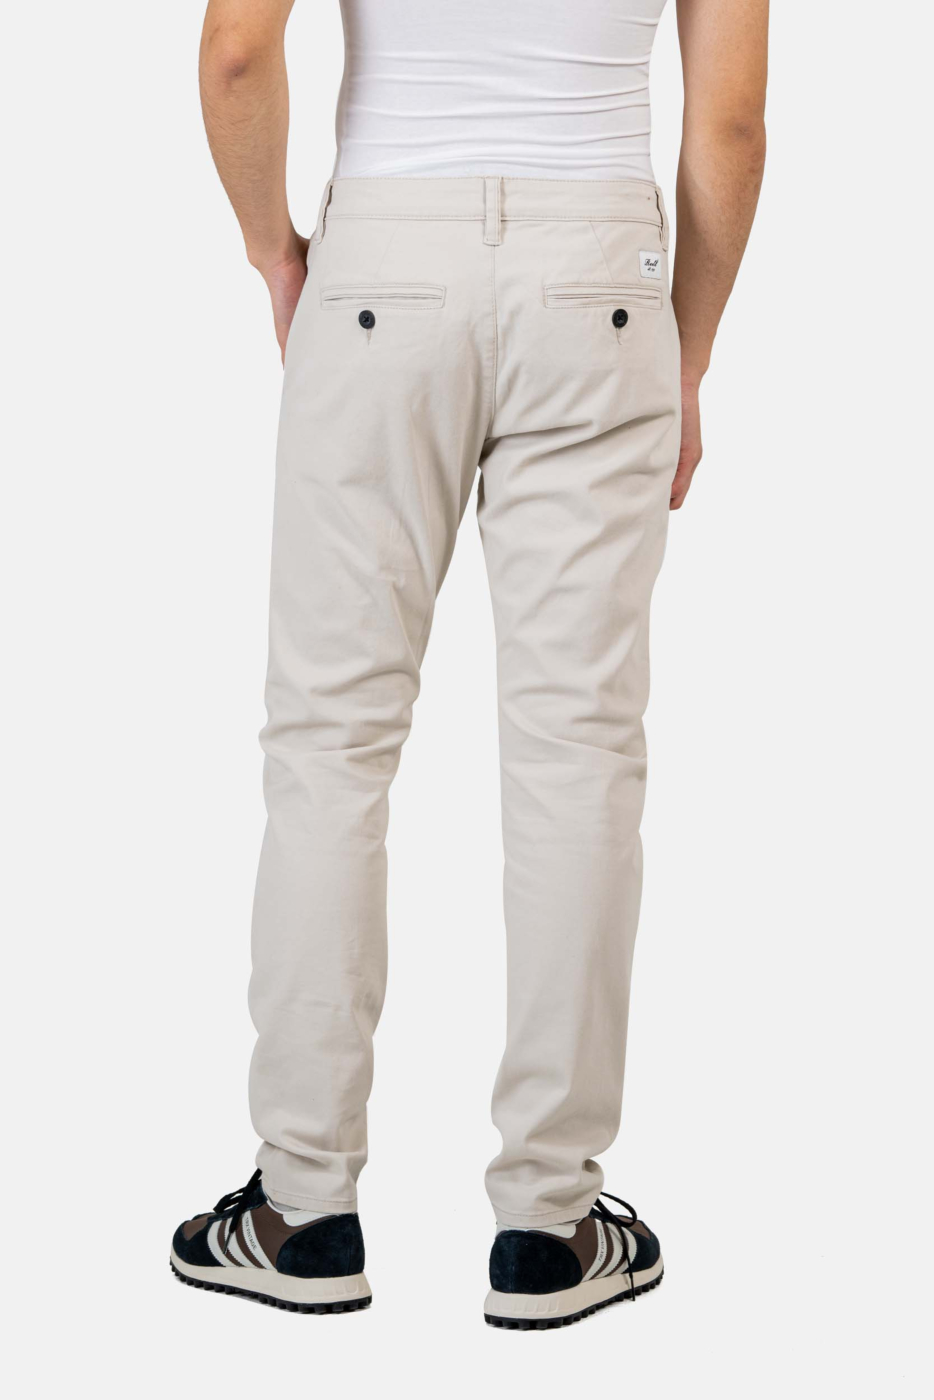 Reell - Flex Tapered Chino - Casual trousers - Dark Sand | 30 - Length: 32  (UK)